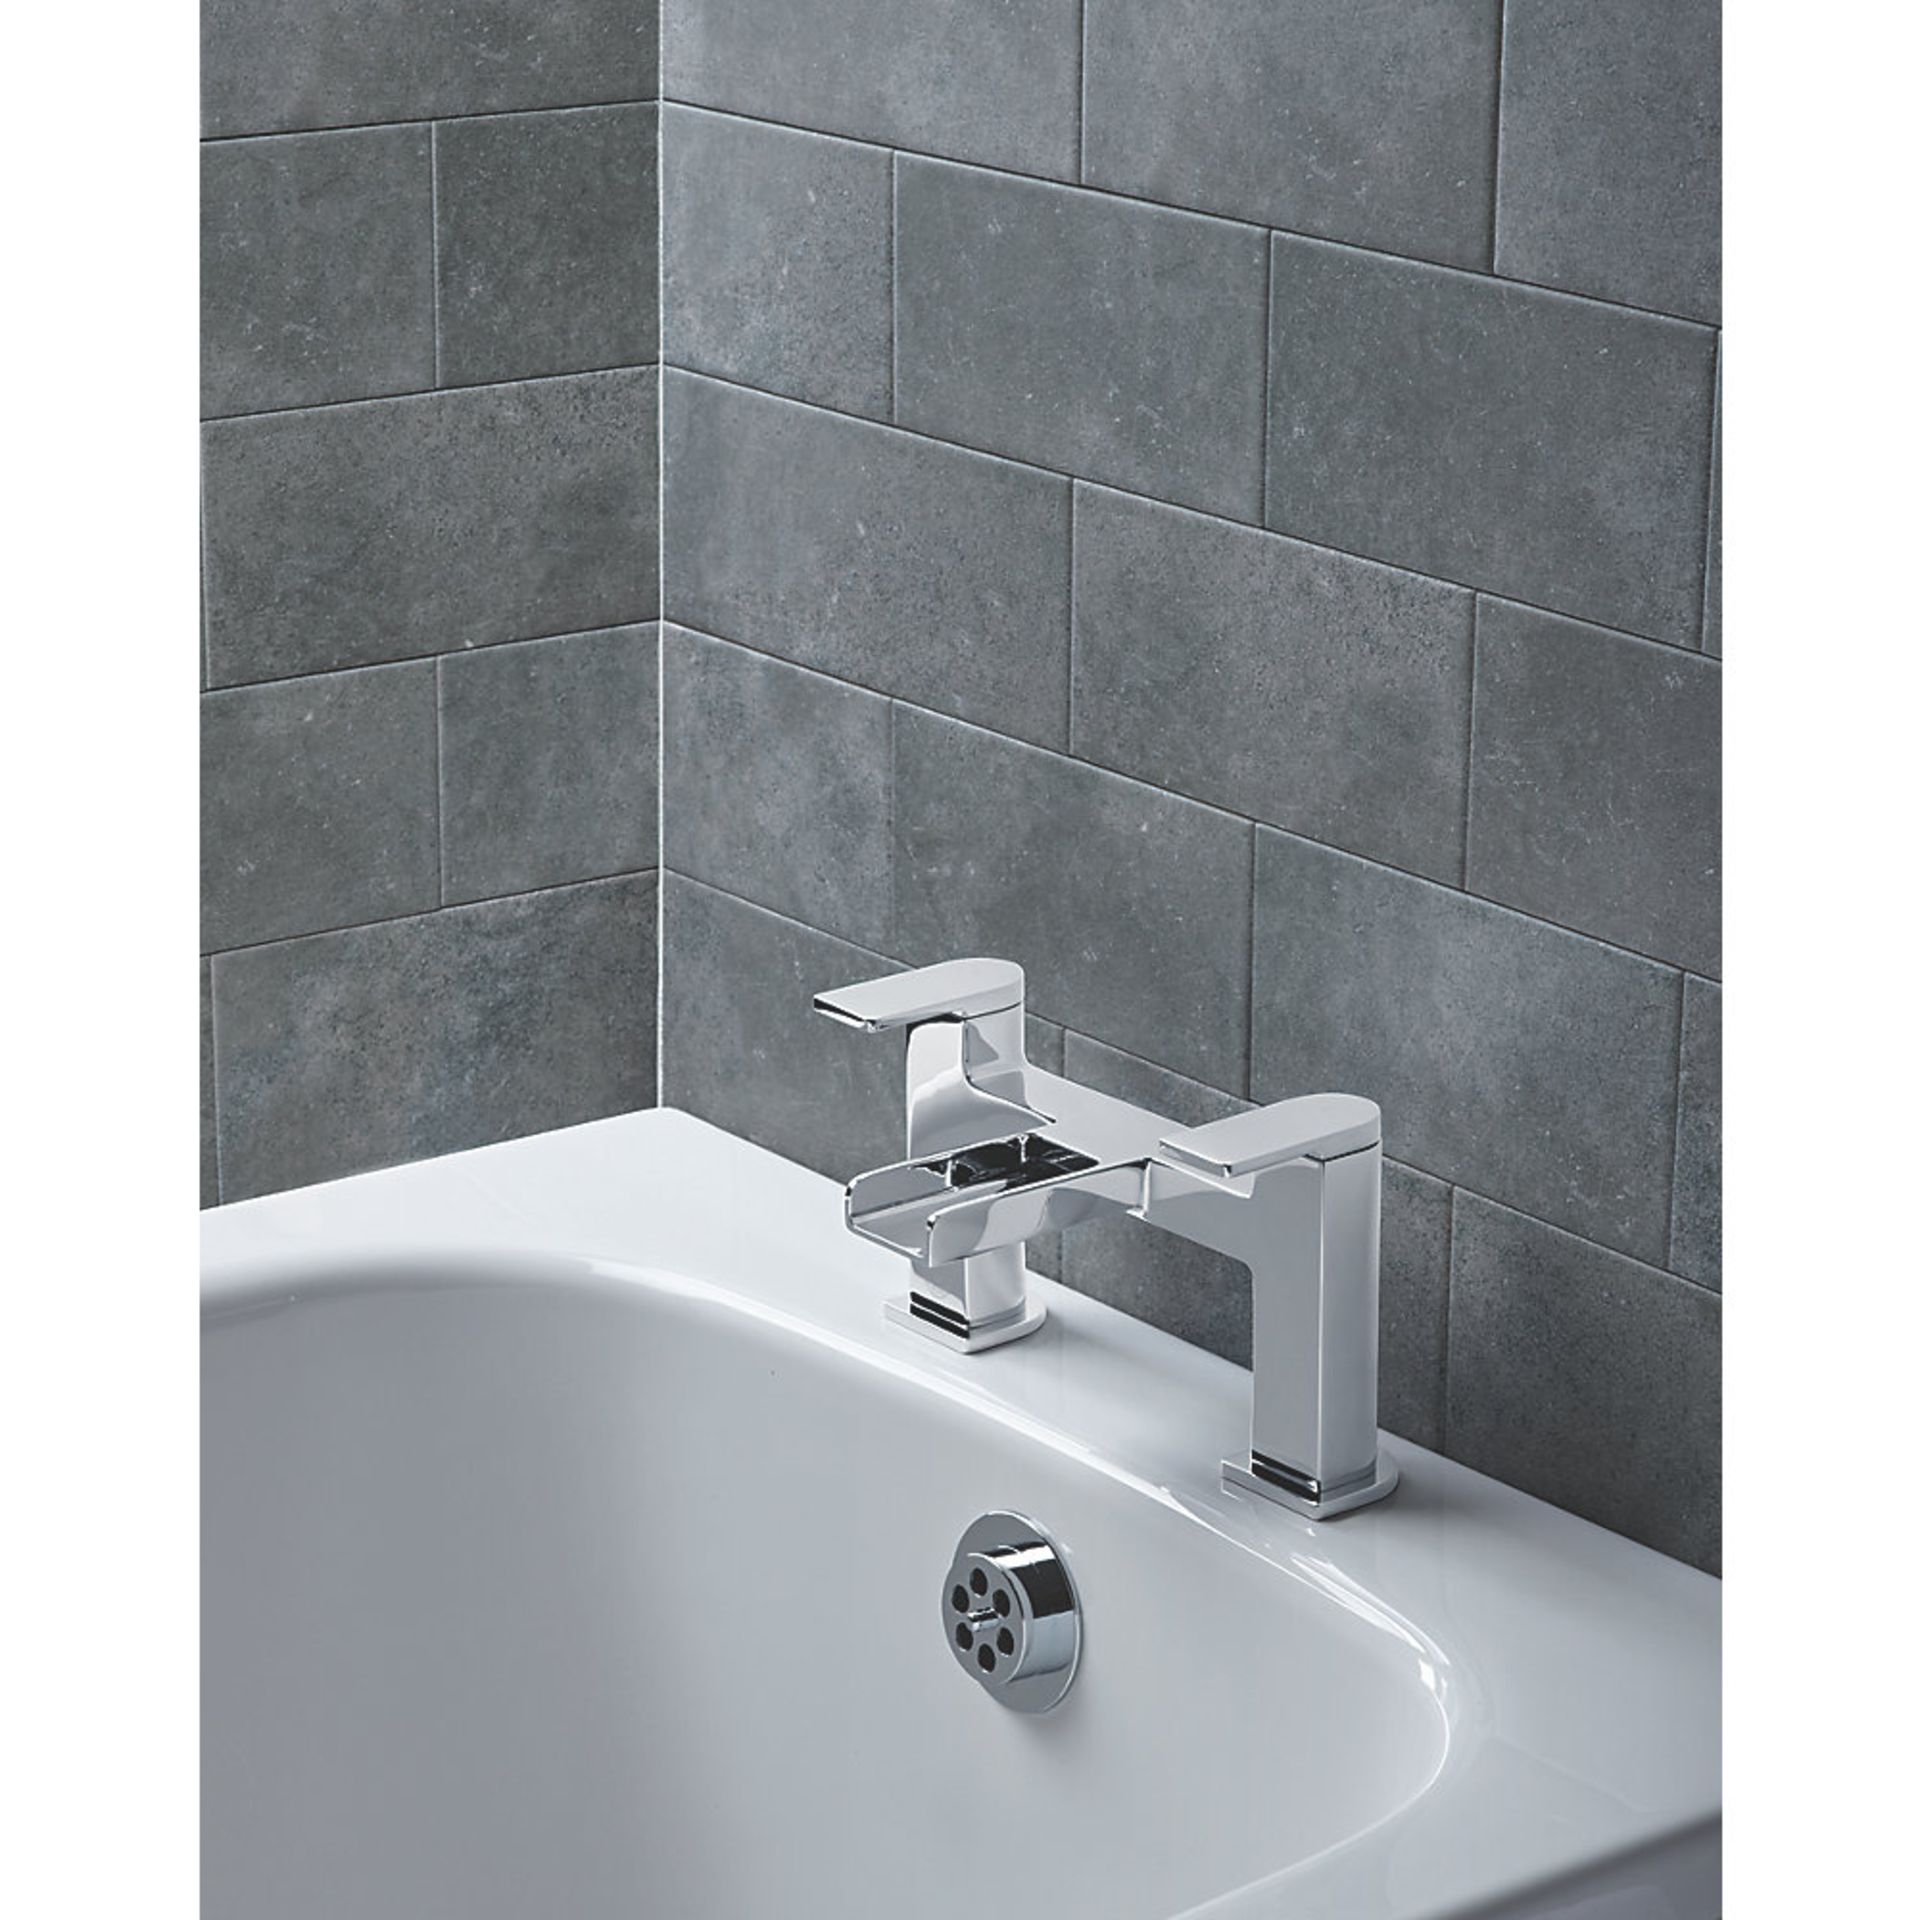 (MC148) Niagara Waterfall Bath Mono Mixer Tap. Double Lever Operation Suitable for High & Low - Image 2 of 3